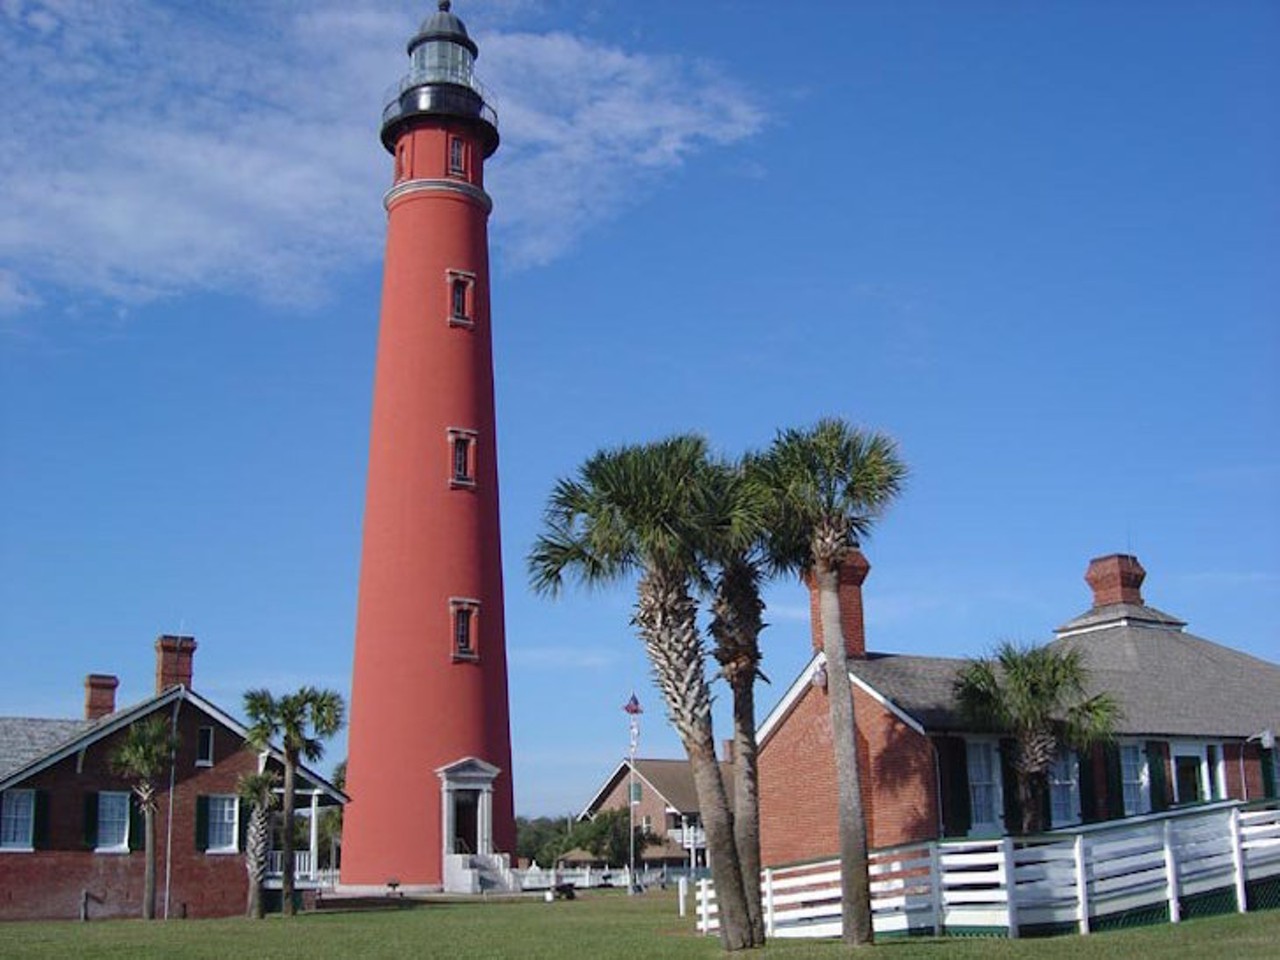 Climb the Ponce Inlet lighthouse
4931 S. Peninsula Drive, Ponce Inlet, 386-761-1821
Venture to the top of this historical lighthouse to see some breathtaking views, and explore the Florida history museum once you have returned to the ground. Admission is $7. 
Photo via Ponce Inlet Lighthouse/Facebook